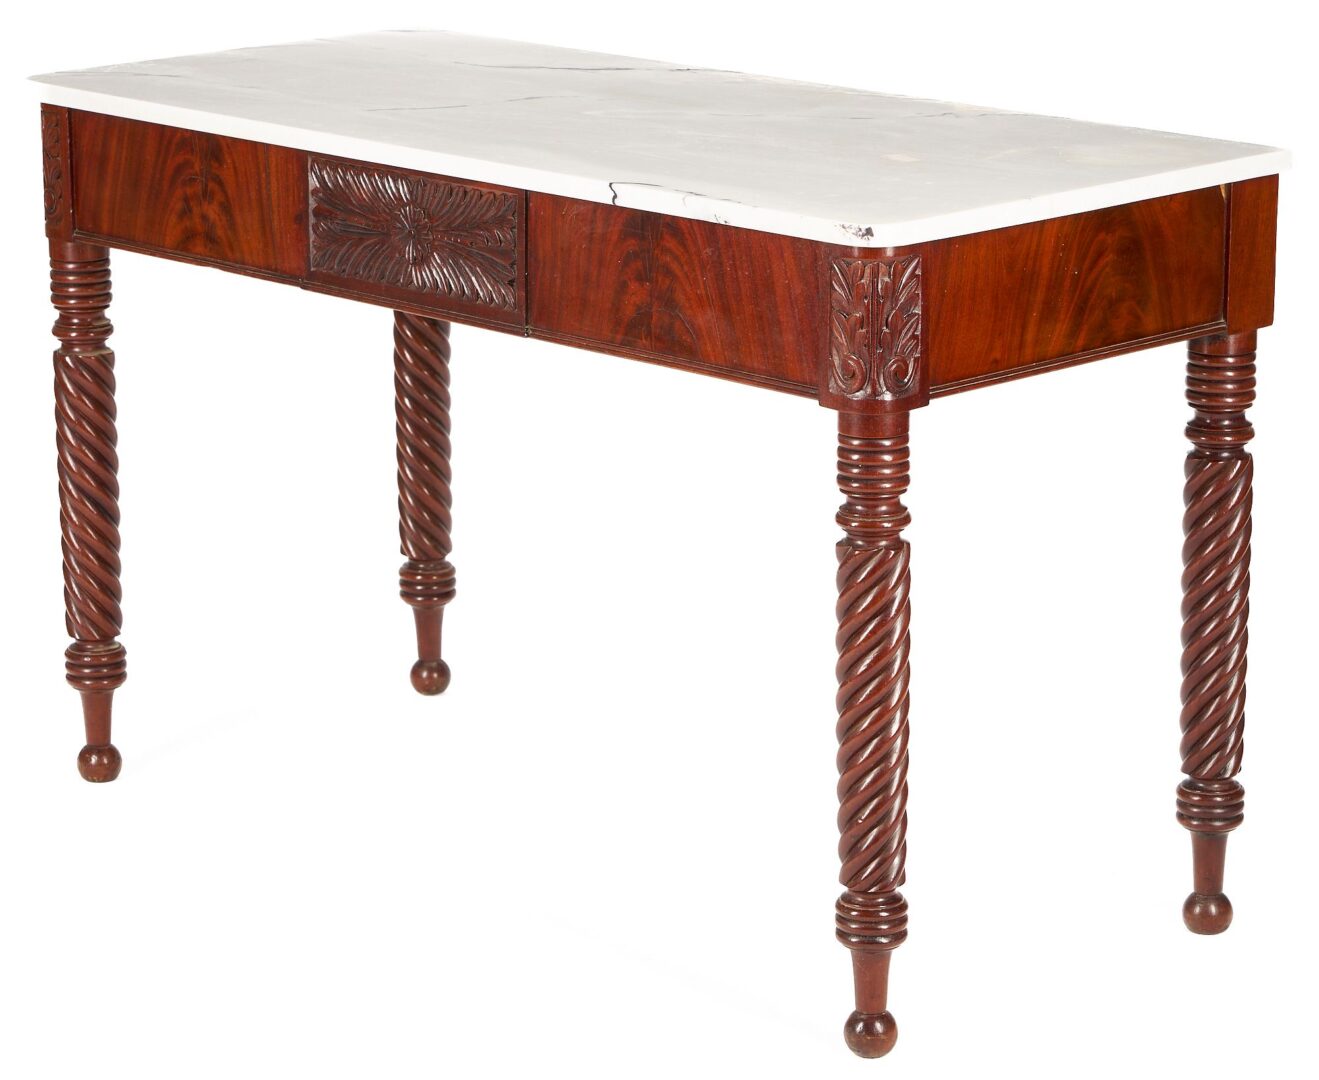 Lot 240: Classical Marble Top Console Table